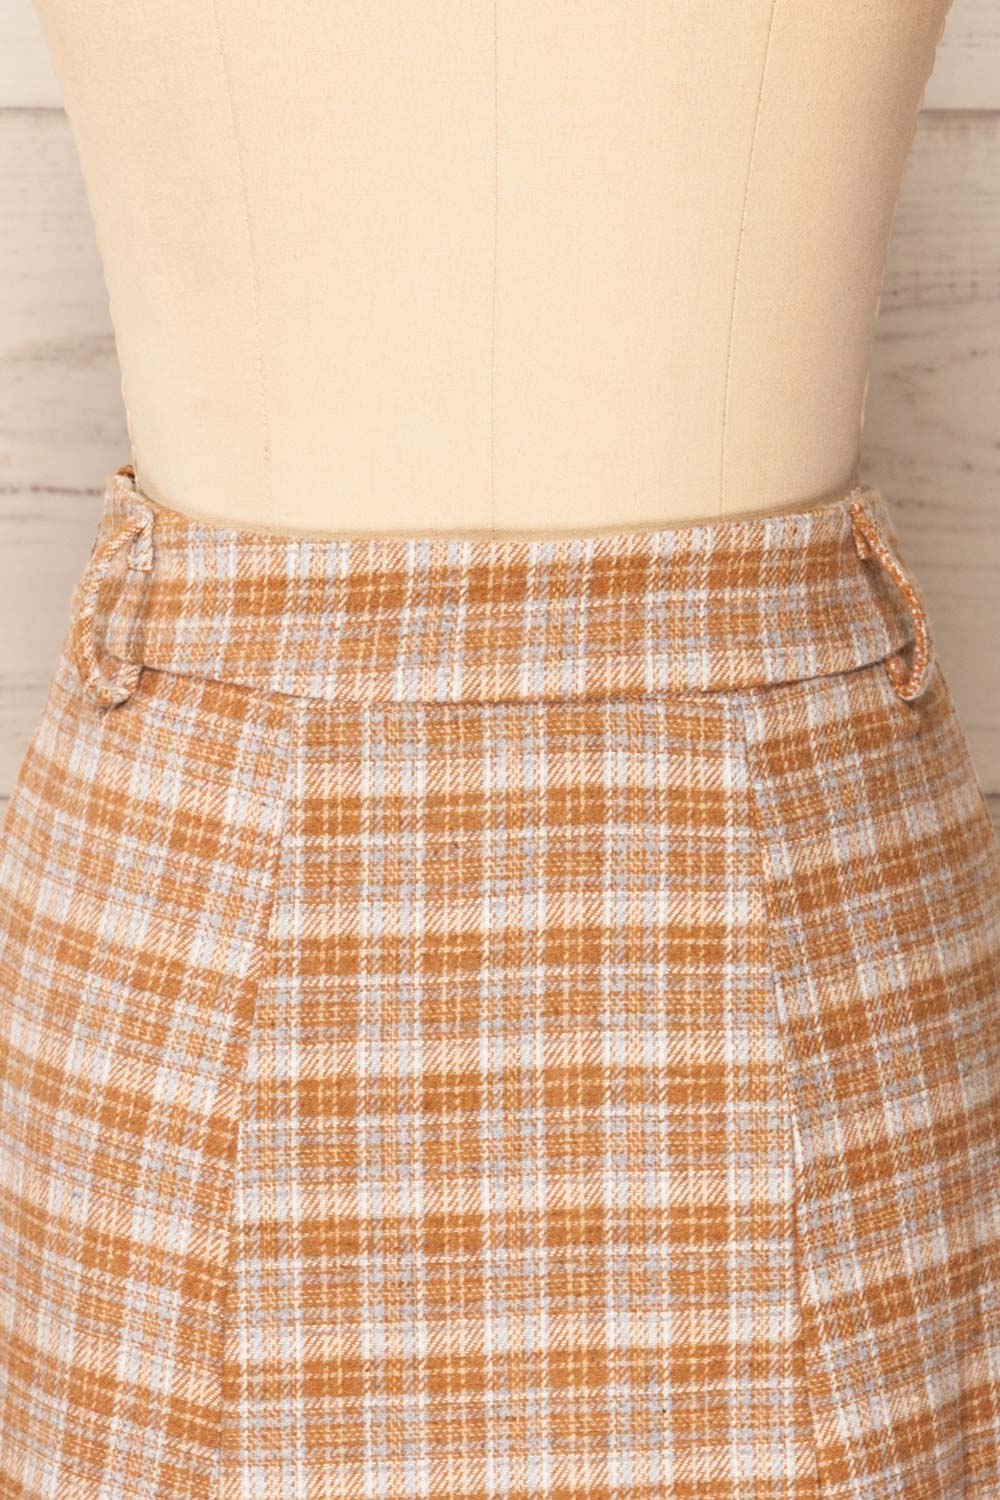 AsYou satin mini skirt with belt in plaid print - part of a set - ShopStyle